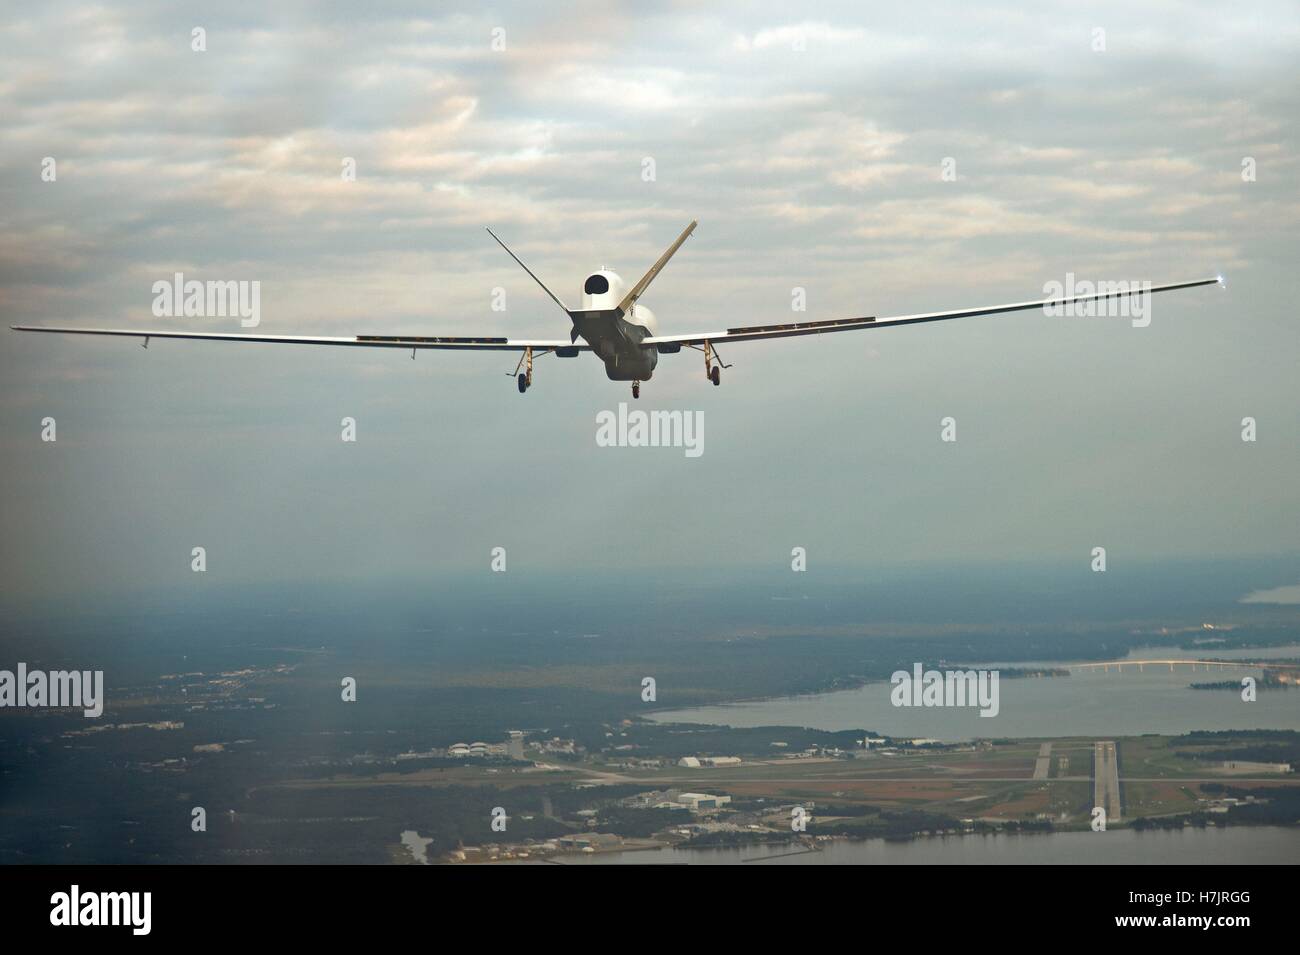 The MQ-4C Triton unmanned aircraft nears the Naval Air Station Patuxent River after completing its inaugural cross-country flight from California September 18, 2014 in Maryland. Stock Photo